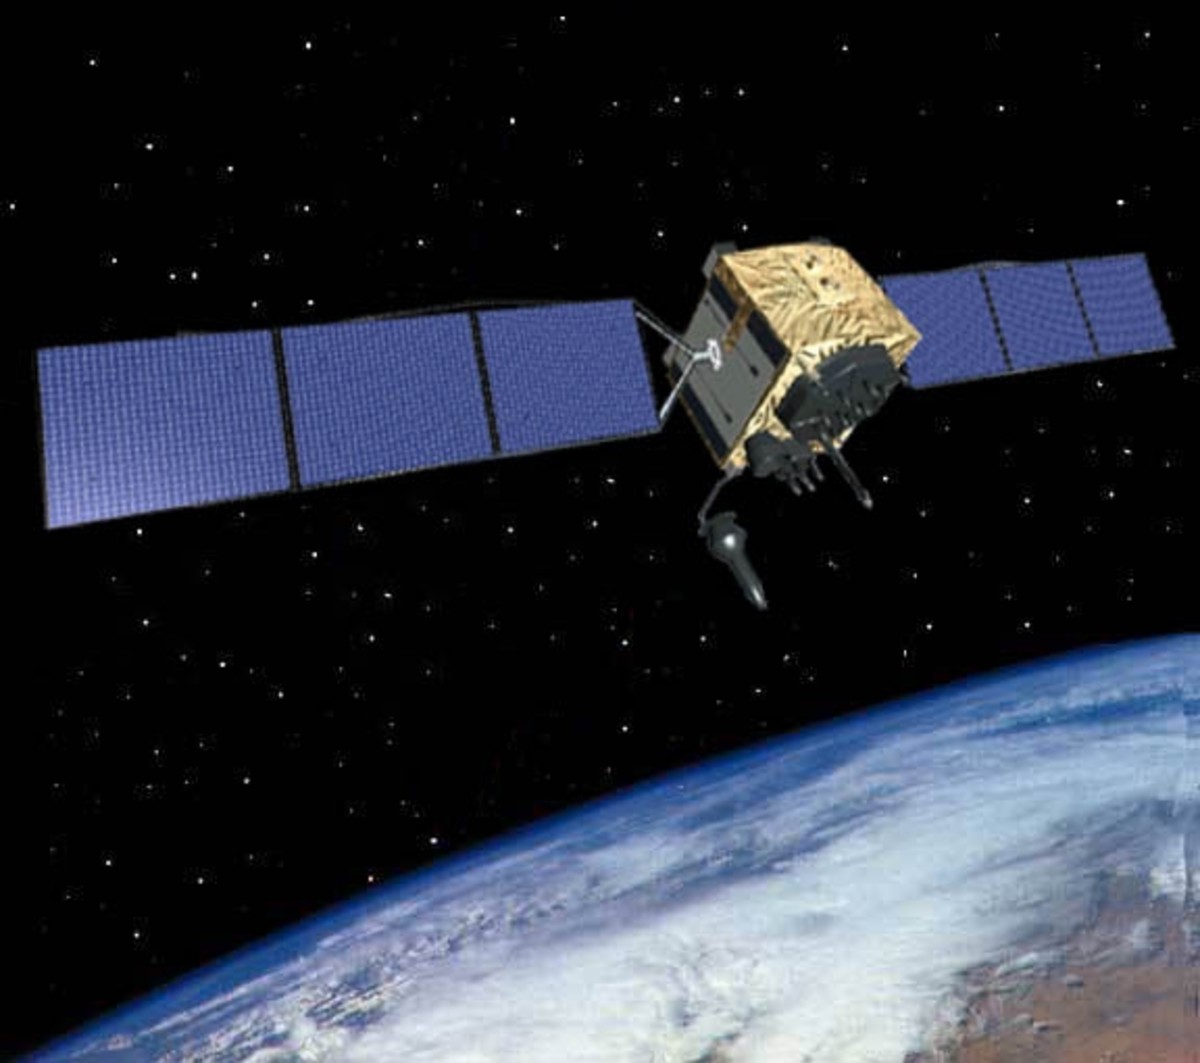 The Global Positioning System IIF satellite, developed and built by Boeing, is the next generation of GPS space vehicle. (U.S. Air Force graphic)